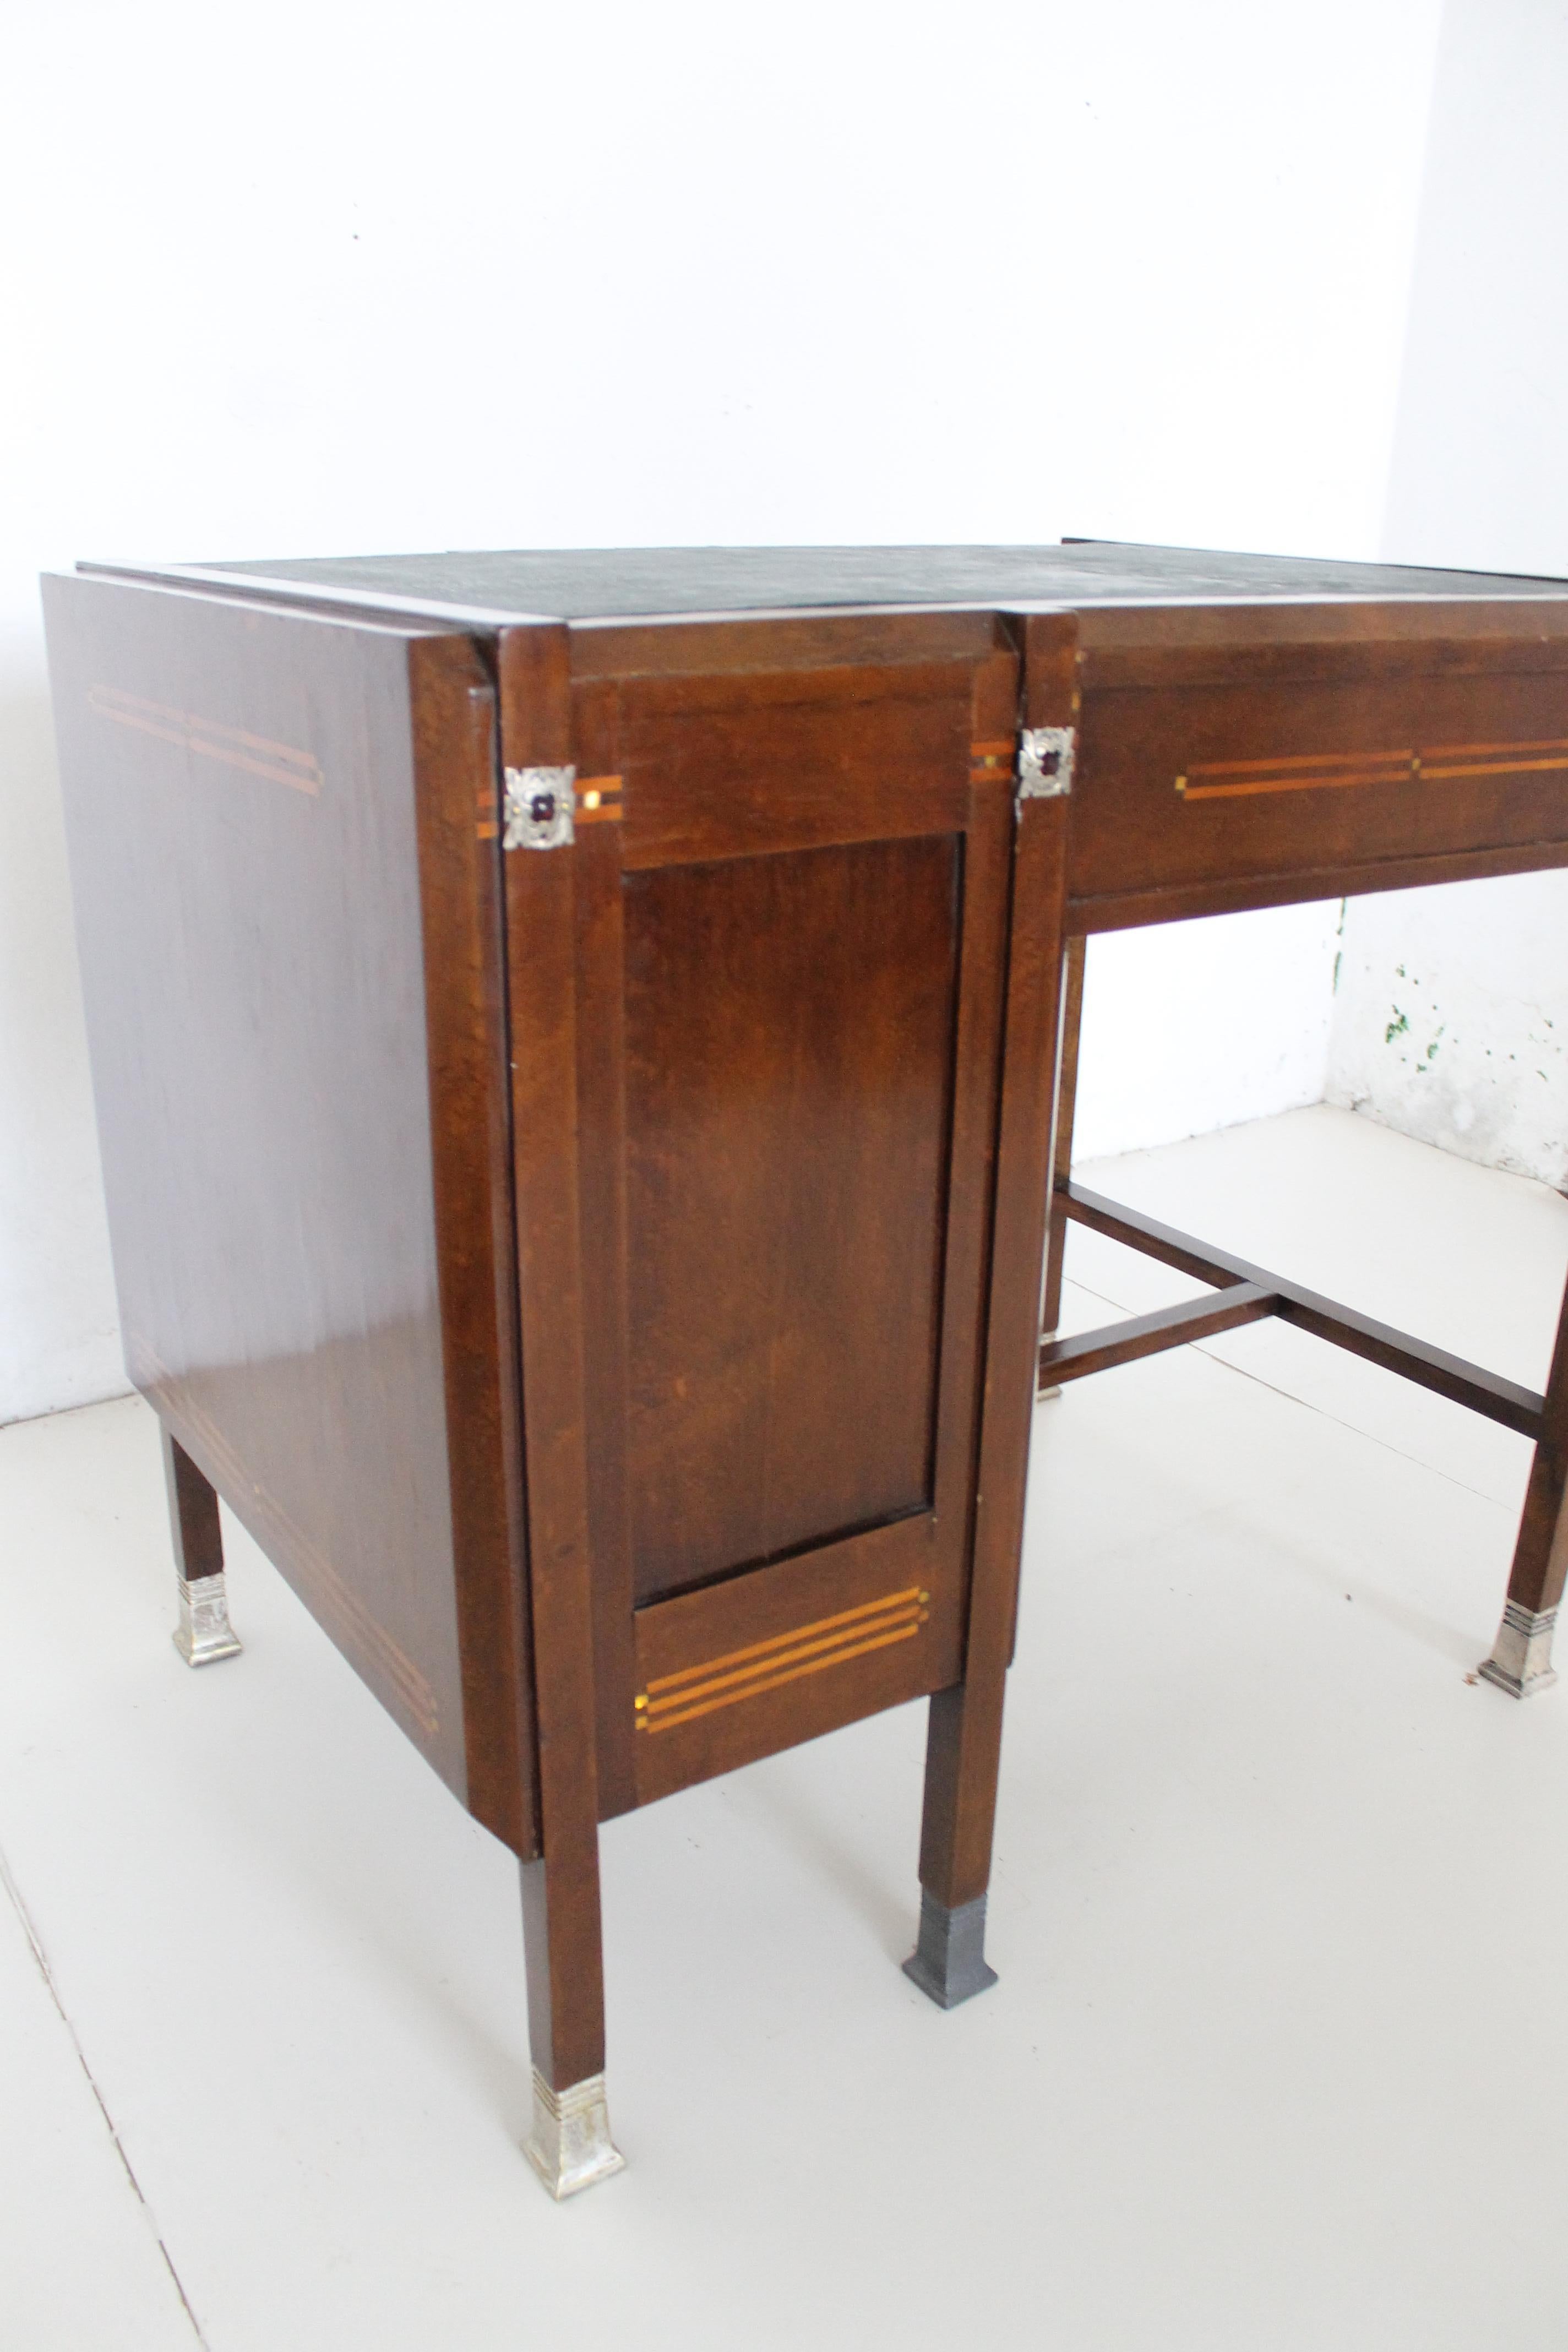 Piero Zen small desk with nickel silver feet and frezies, maple and mather of pearl inlays, circa 1905.
The friezes around the top carry small ruby glass half-spheres.

Signature engreved in the lock of the door (see in the